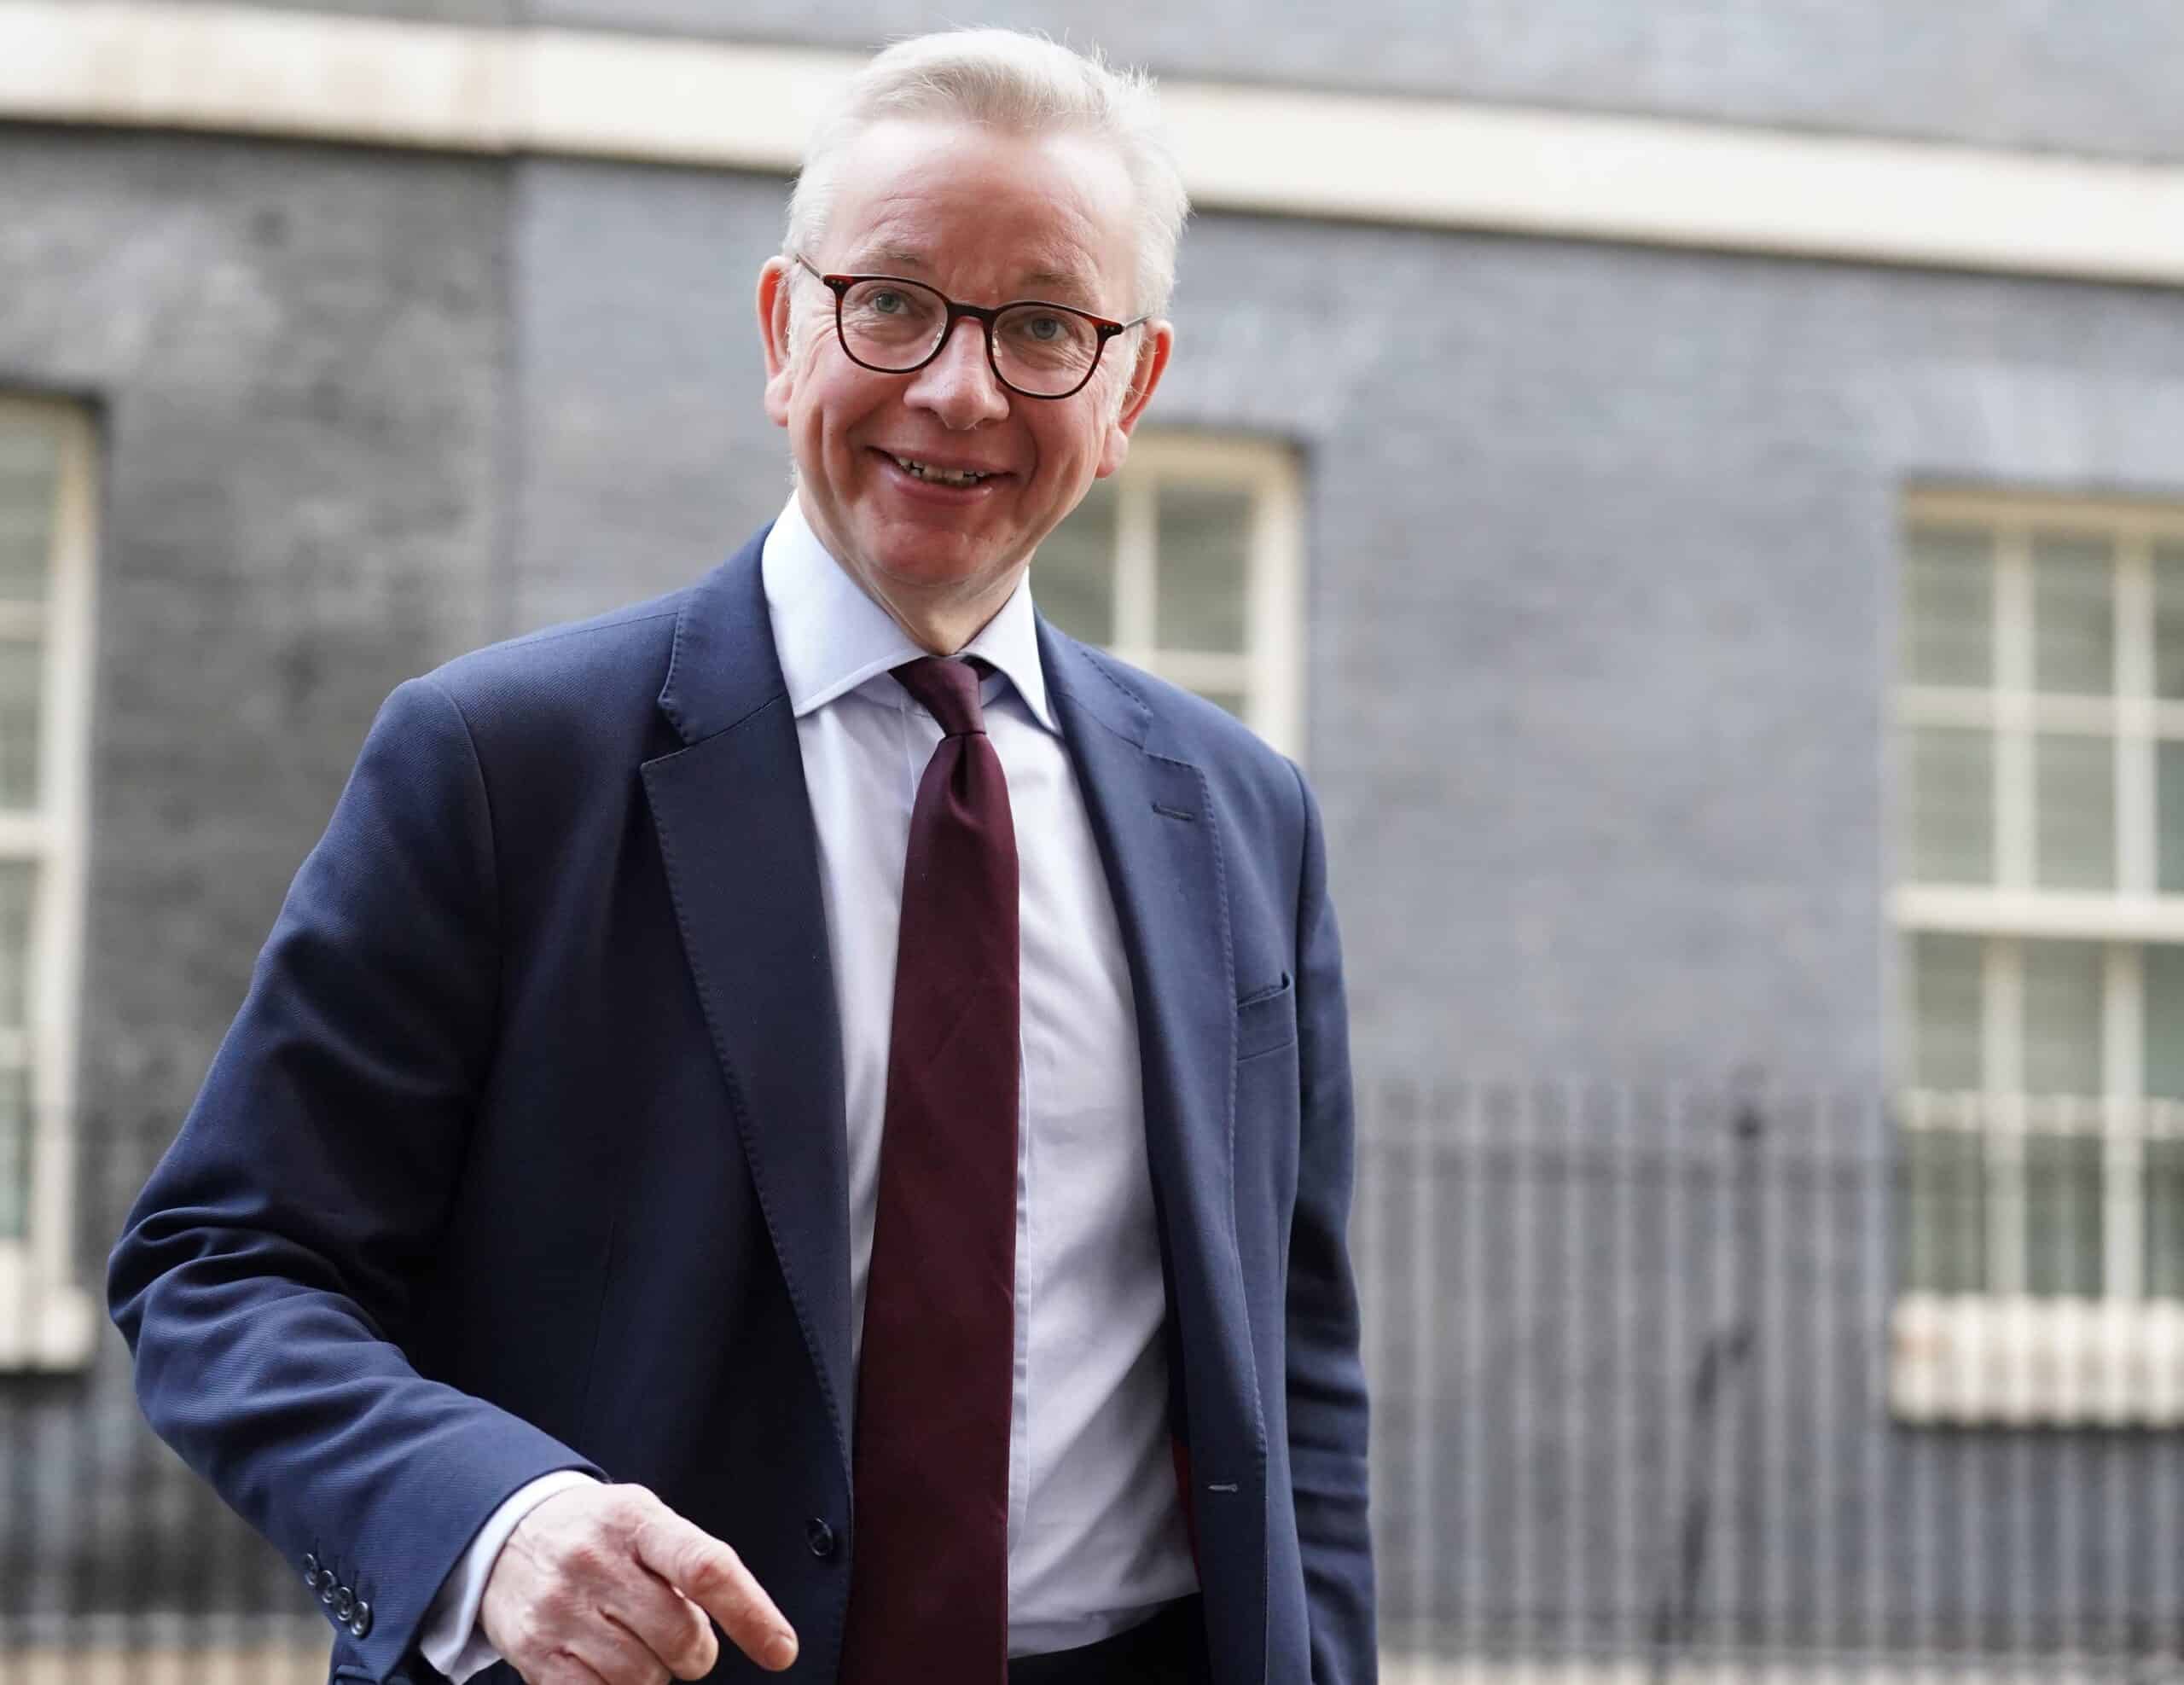 Michael Gove has taxpayer-funded smoking hut built to avoid being heckled in the street